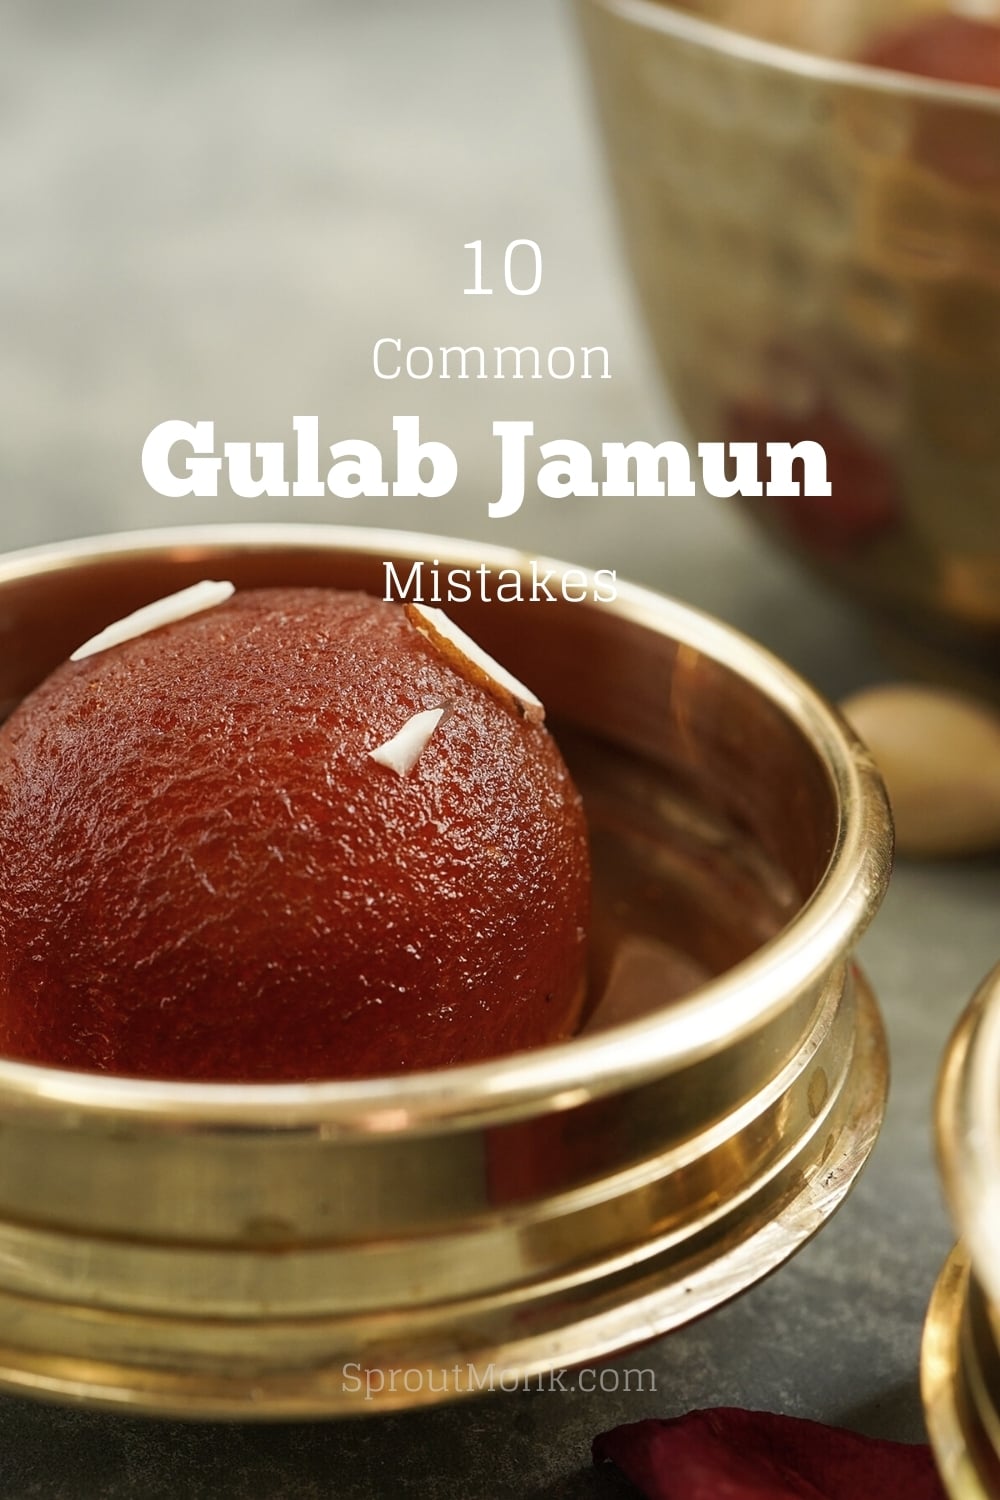 gulab jamun mistakes guide cover image